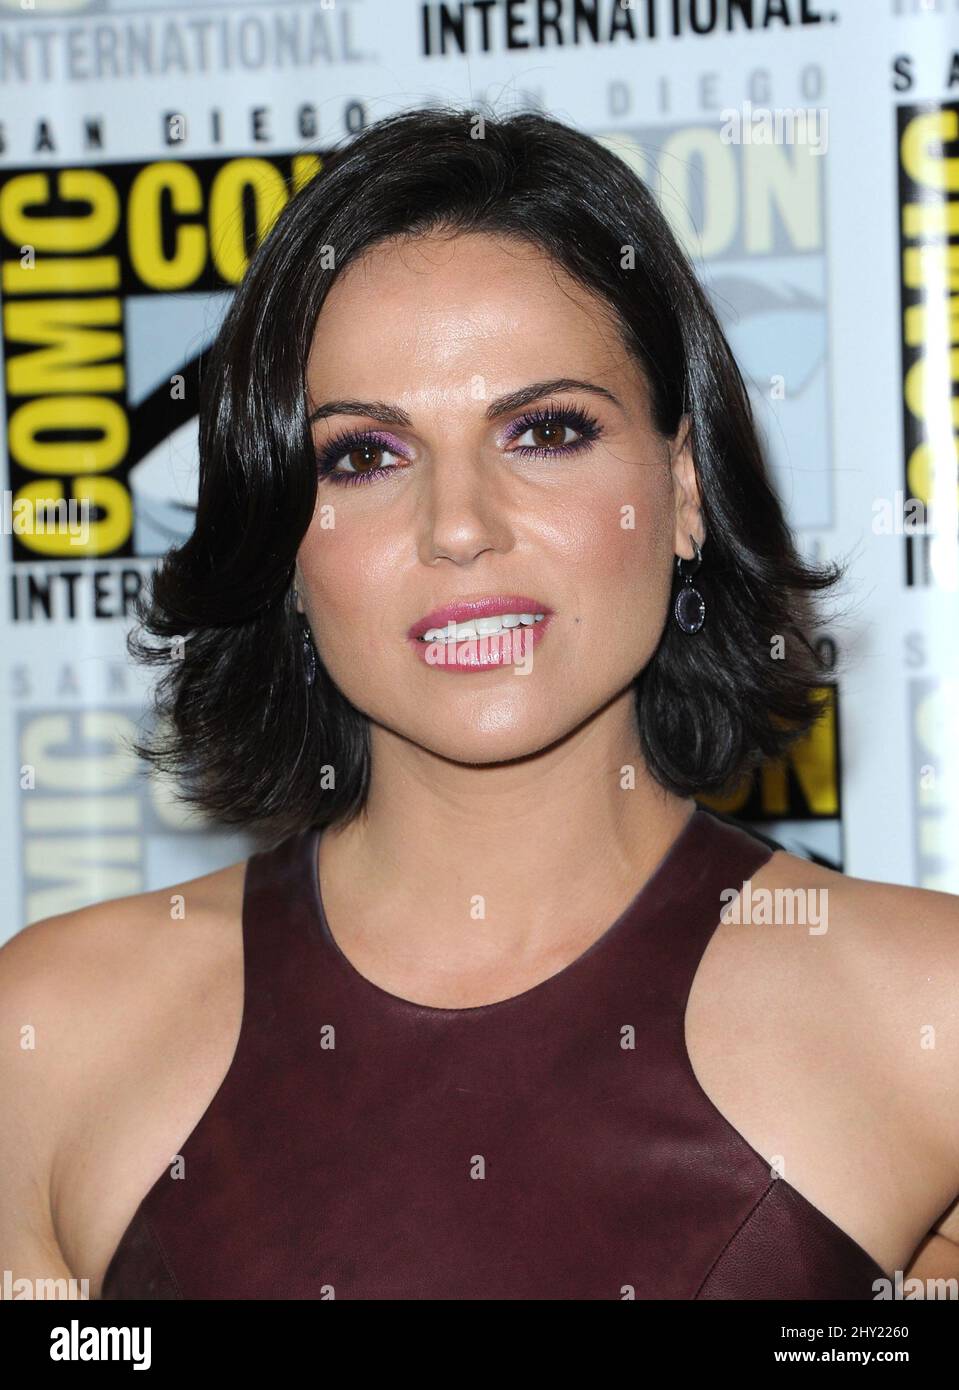 Lana Parrilla attends the "Once Upon A Time" at Comic-Con 2013 held at the  San Diego Convention Center Stock Photo - Alamy